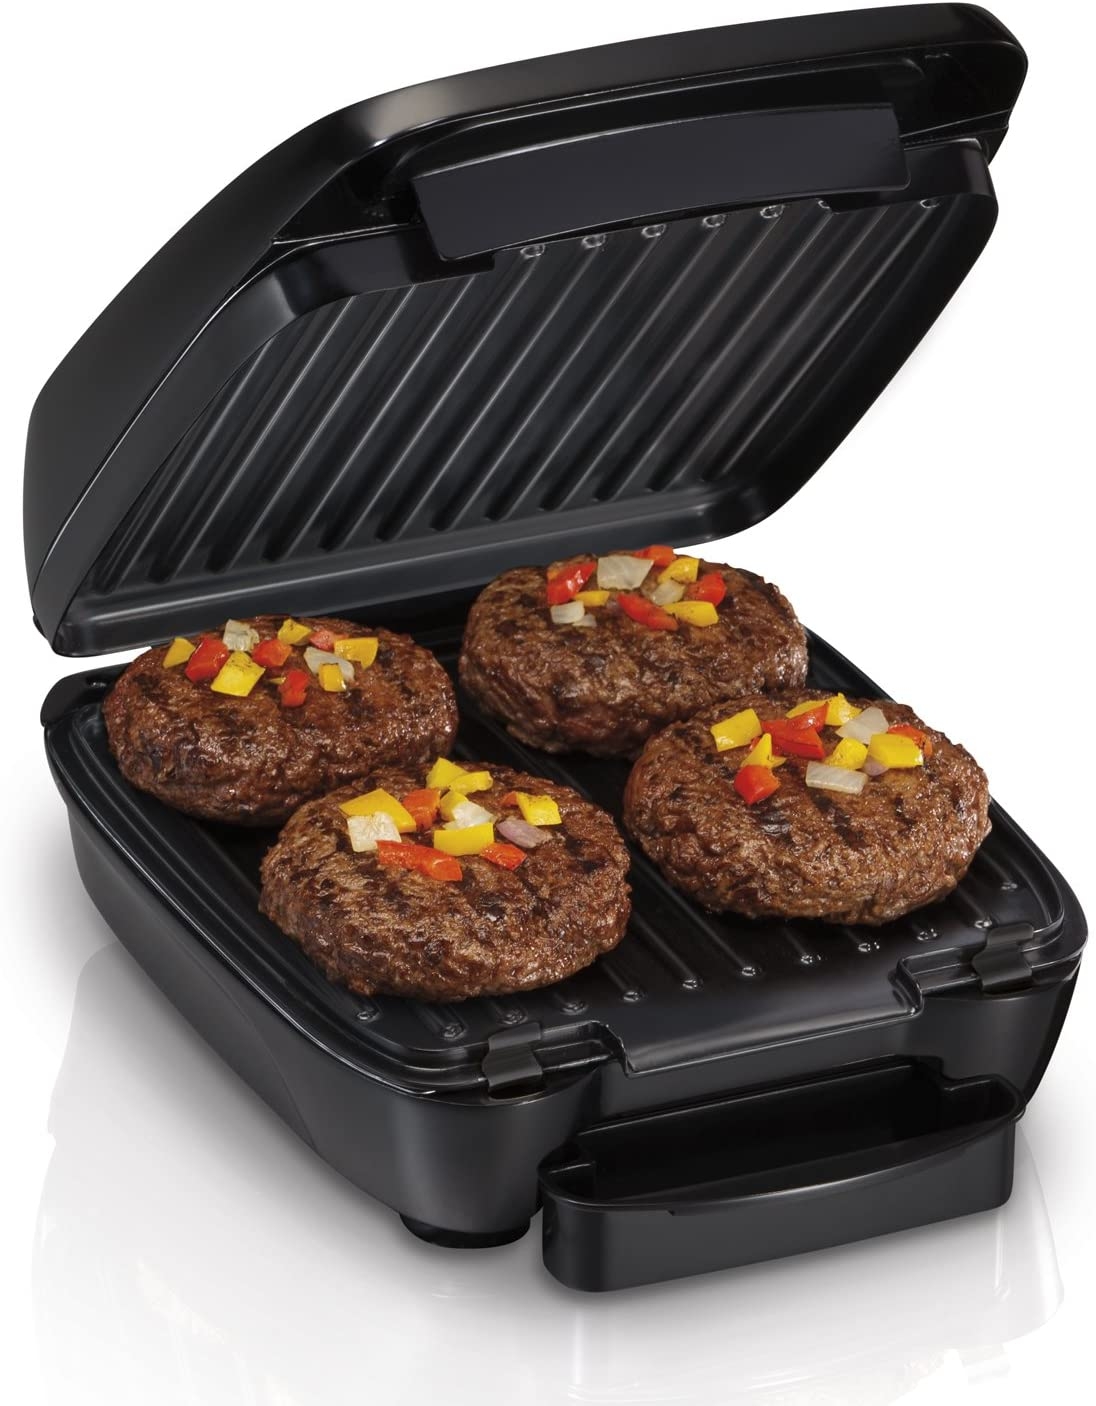 Hamilton Beach 4-Serving Electric Indoor, Removable Nonstick Plates, Low Fat Grilling, Black (25357) Import To Shop ×Product